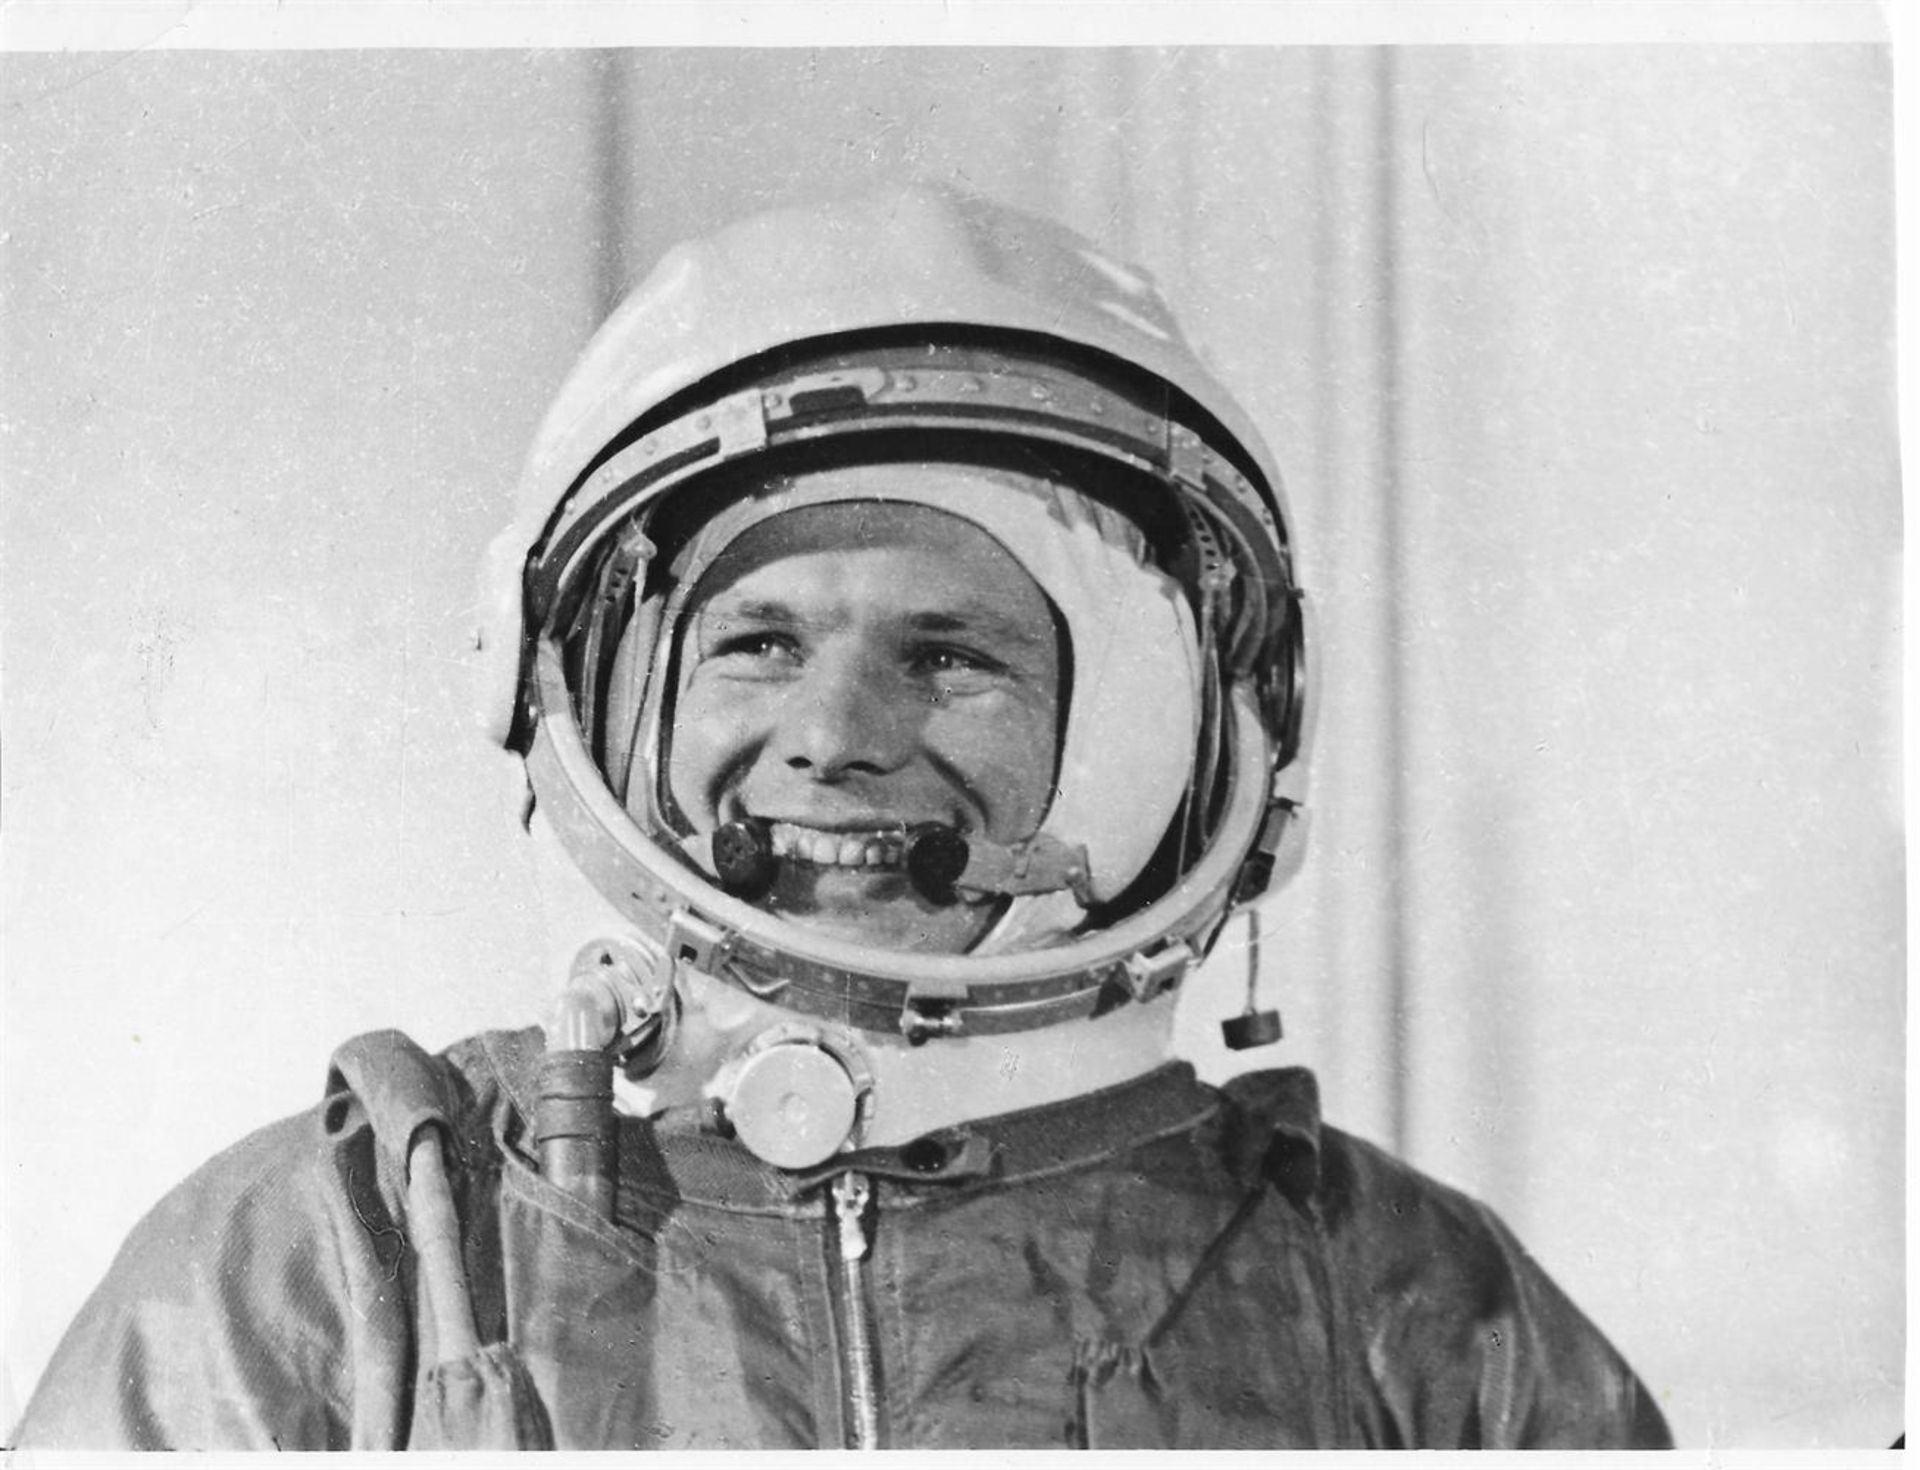 Portrait of the first human to journey into outer space, Yuri Gagarin, Vostok 1, 12 Apr 1961